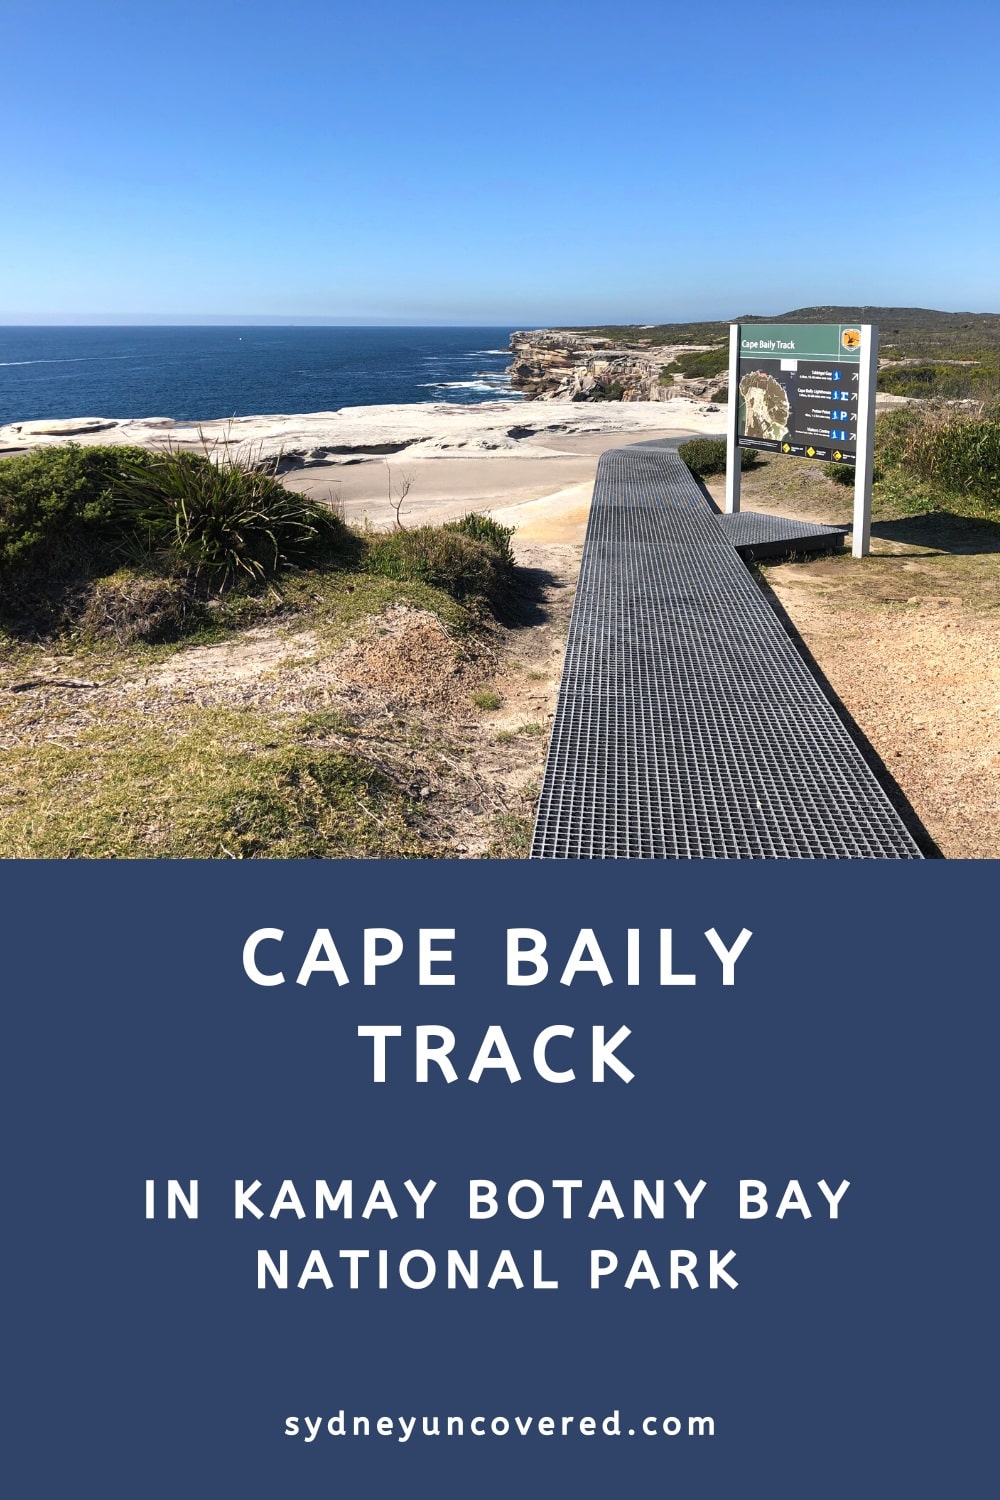 Cape Baily Track in Kamay Botany Bay National Park